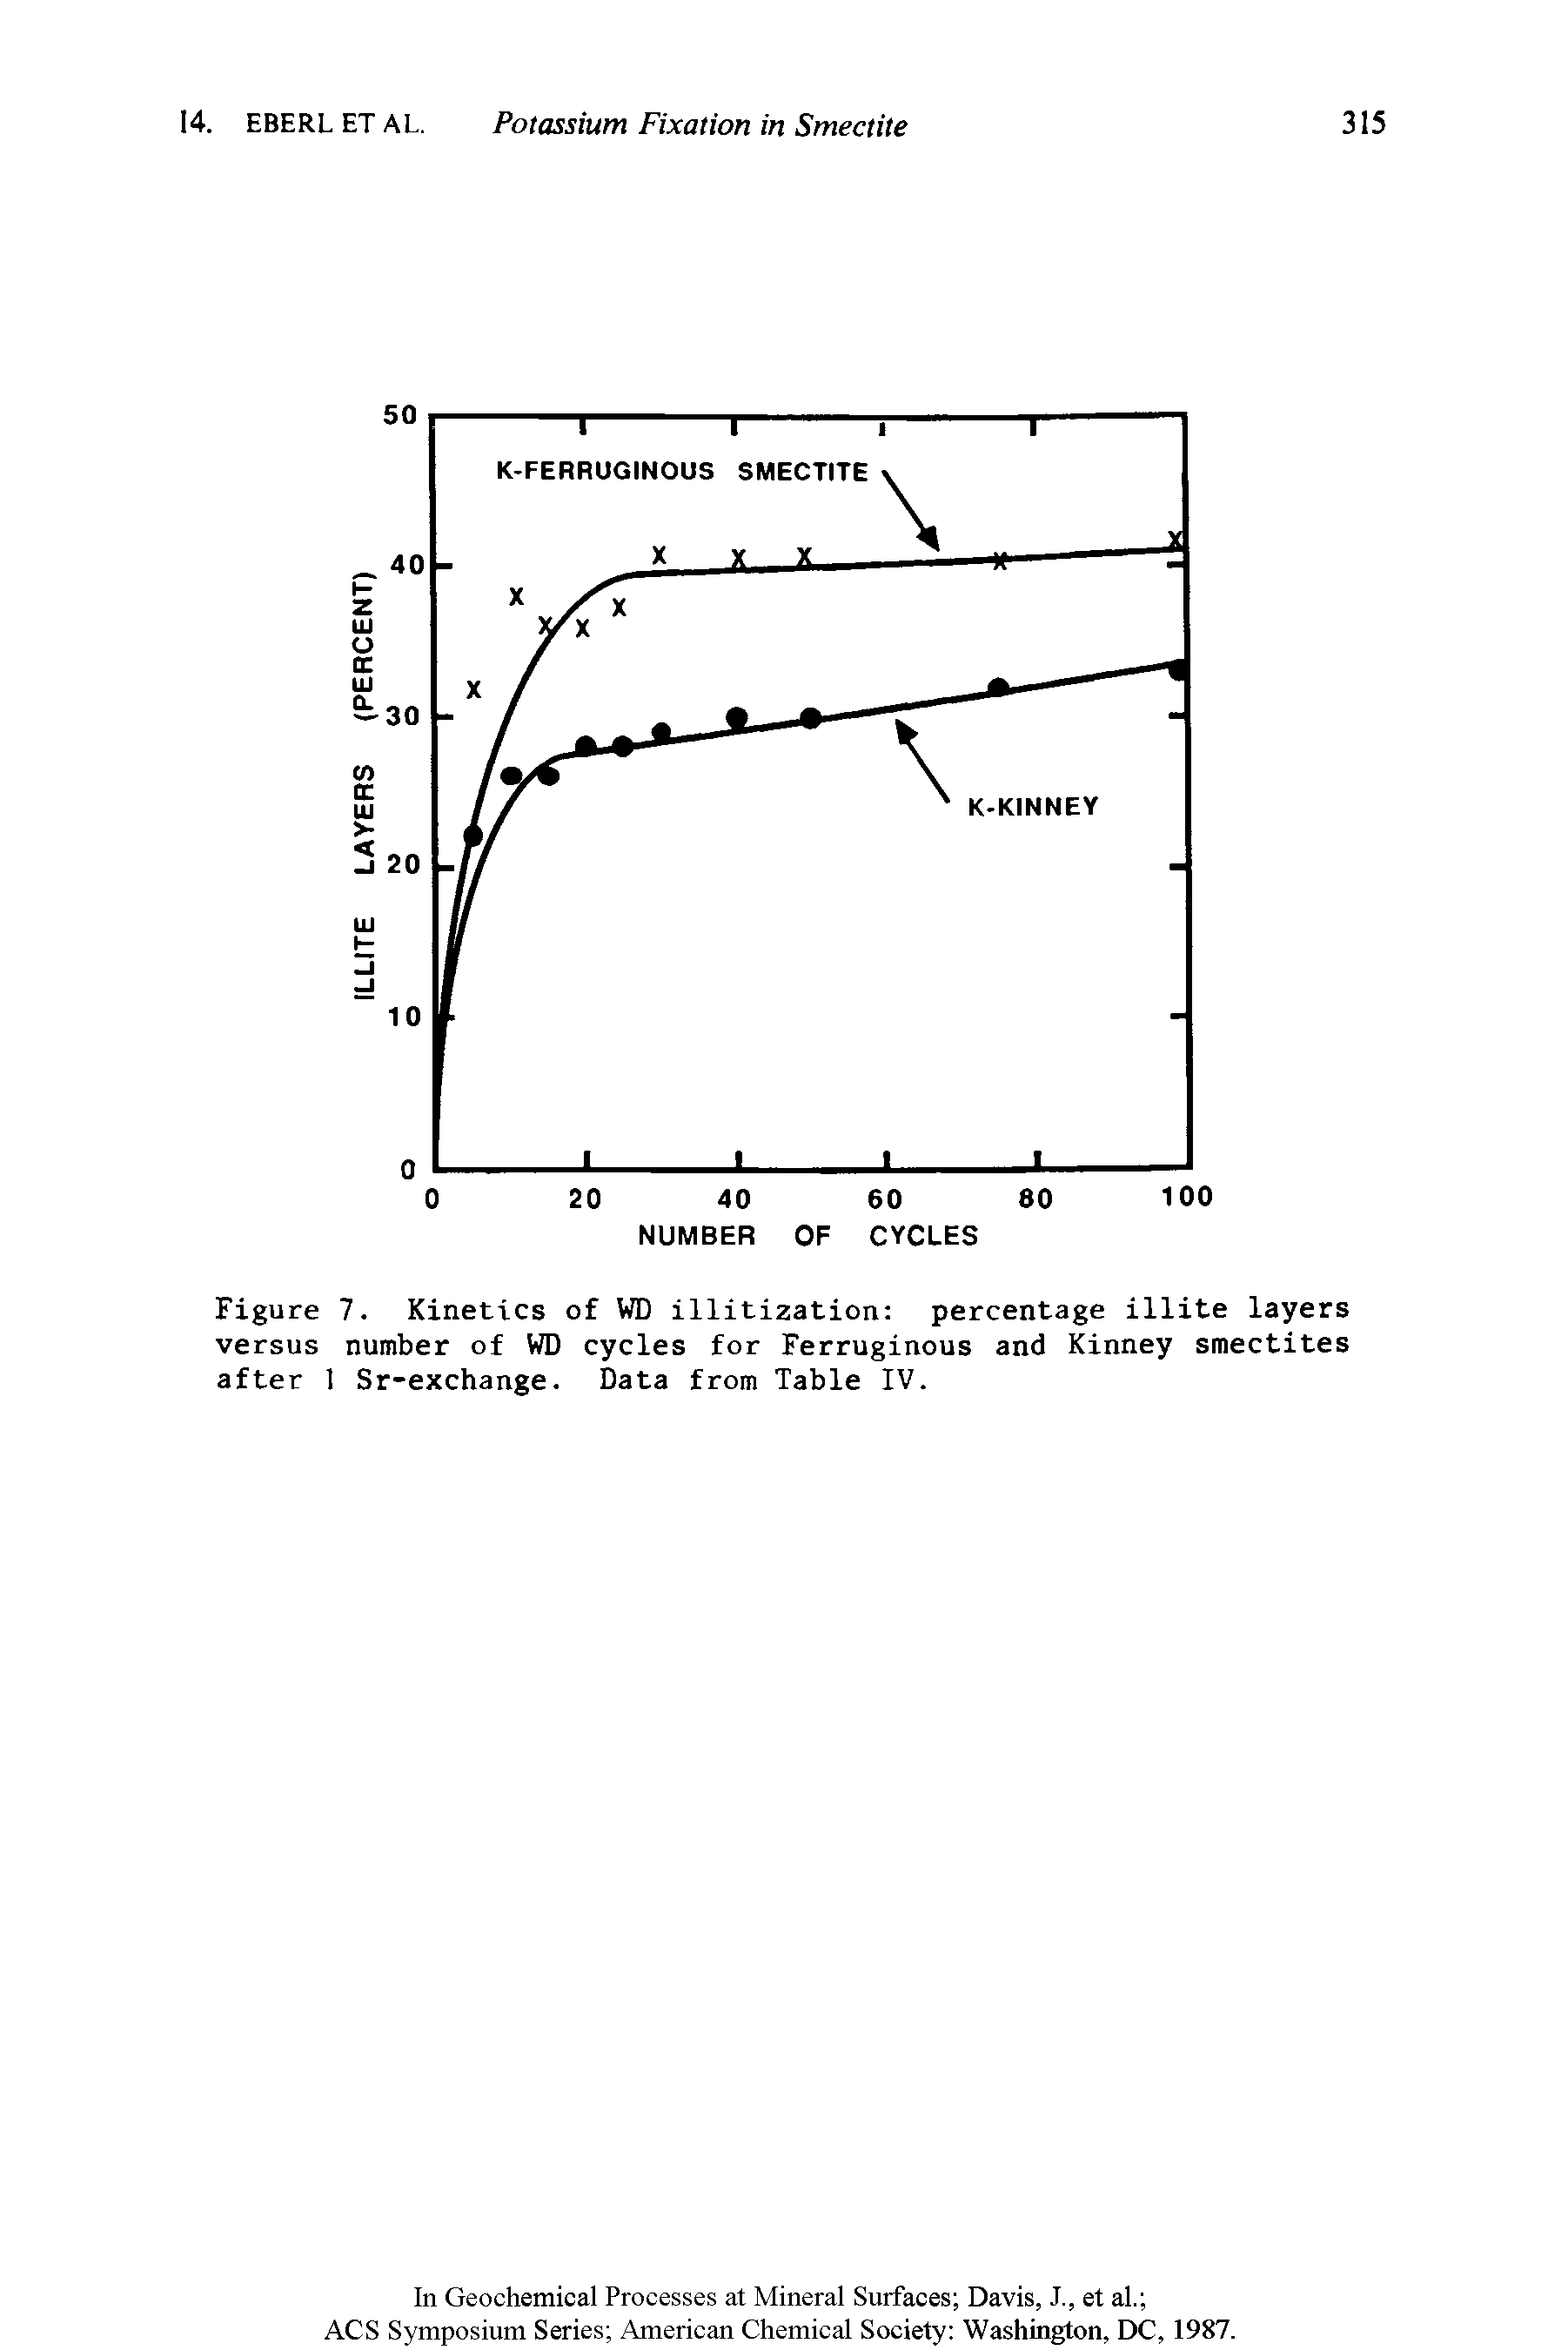 Figure 7. Kinetics of WD illitization percentage illite layers versus number of WD cycles for Ferruginous and Kinney smectites after 1 Sr-exchange. Data from Table IV.